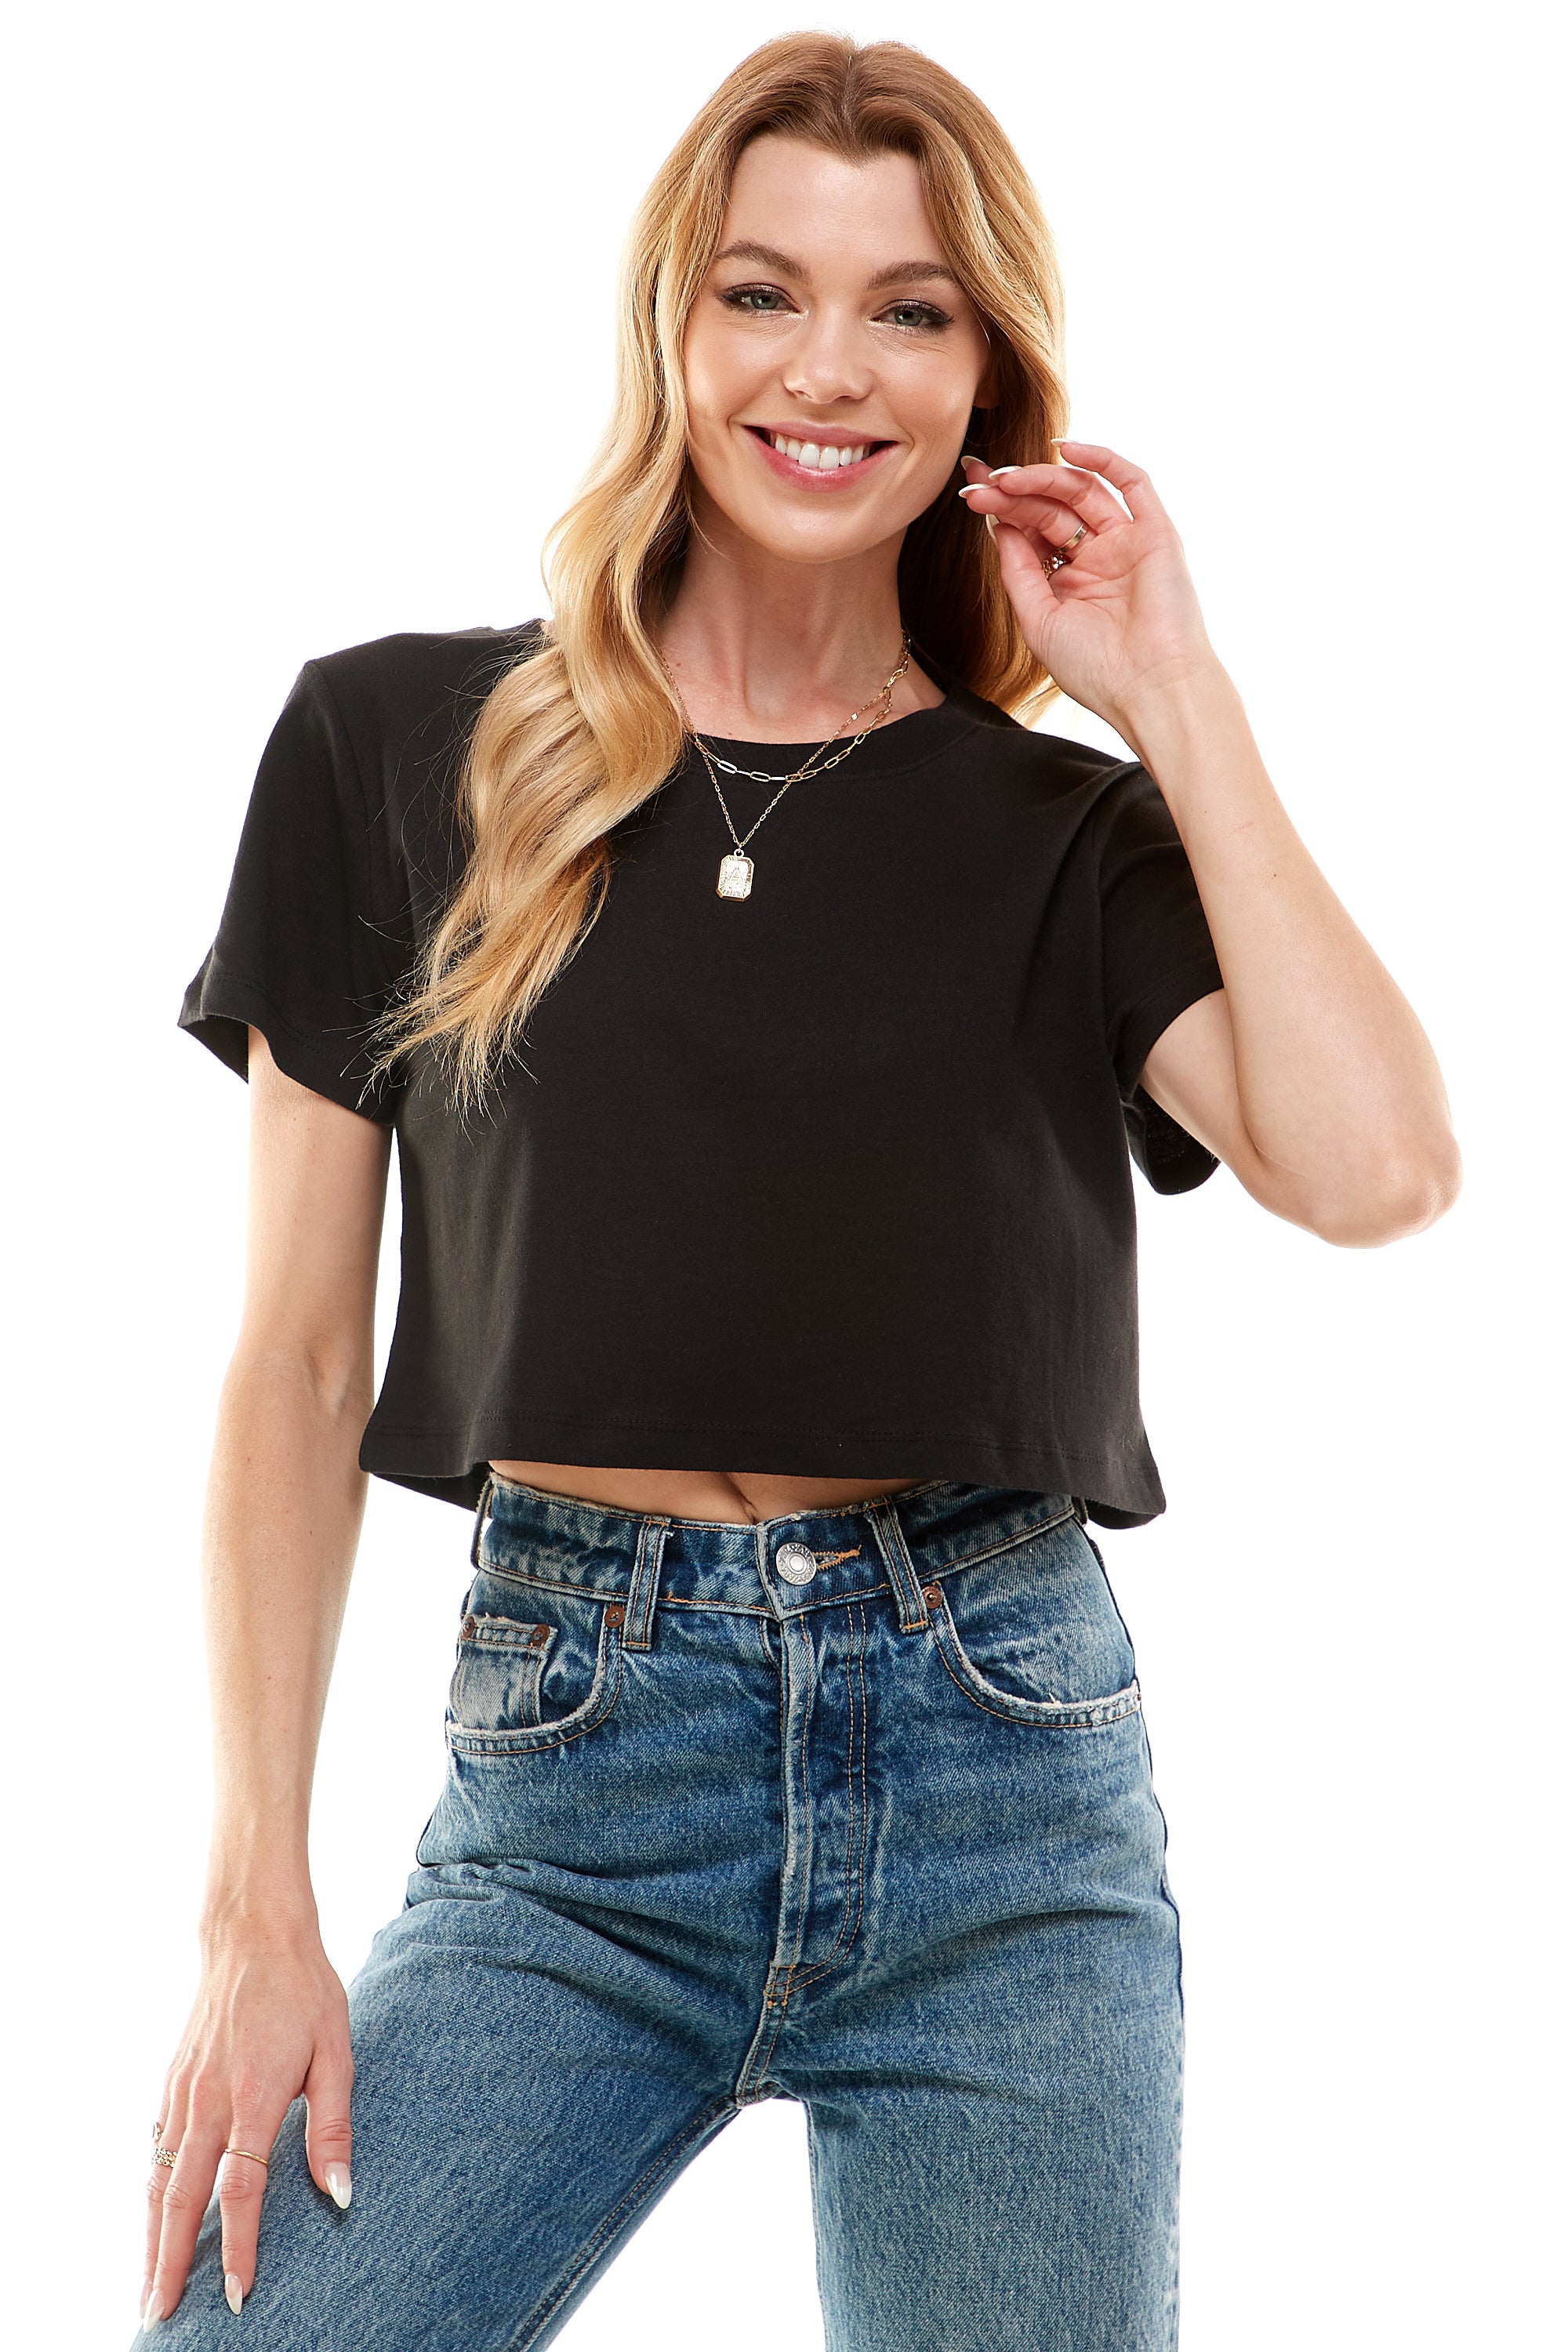 RightPerson Women's Basic Short Sleeve Scoop Neck Crop Top Cotton Crop Tee  Shirts(Black,S) at  Women's Clothing store